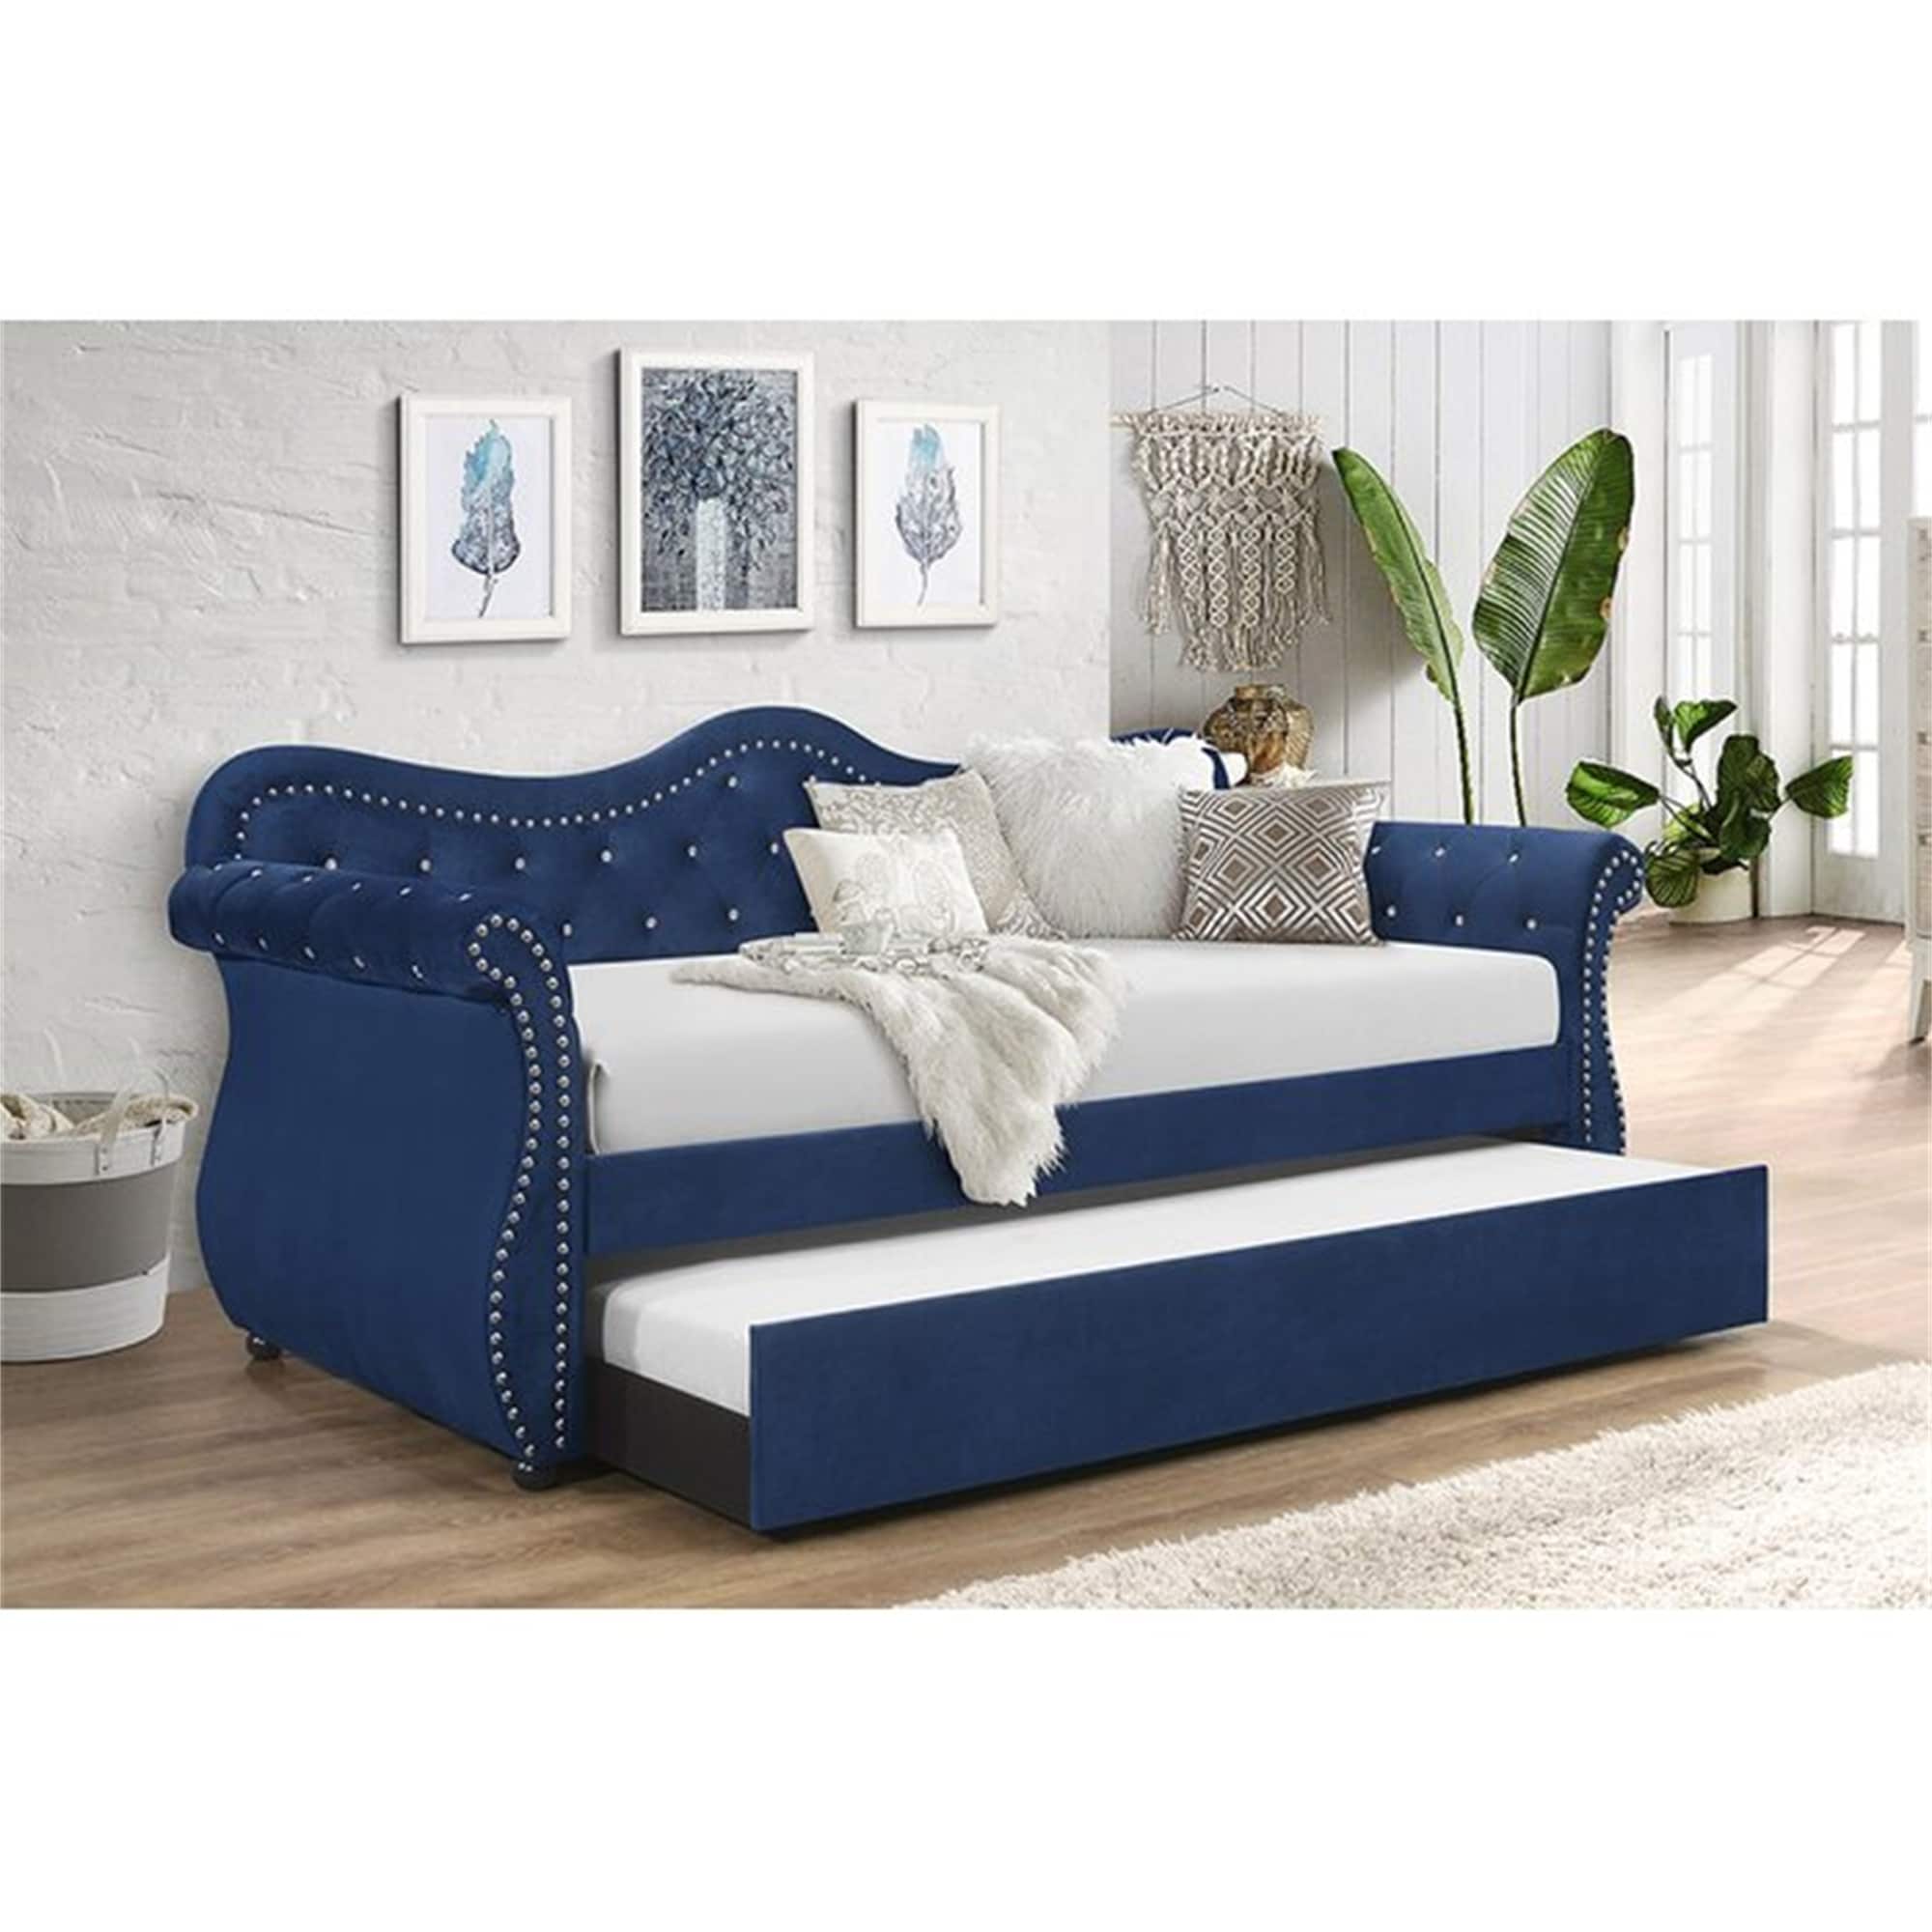 Twin Solid Wood Daybed Velvet For Small Room  With Trundle  Nailhead